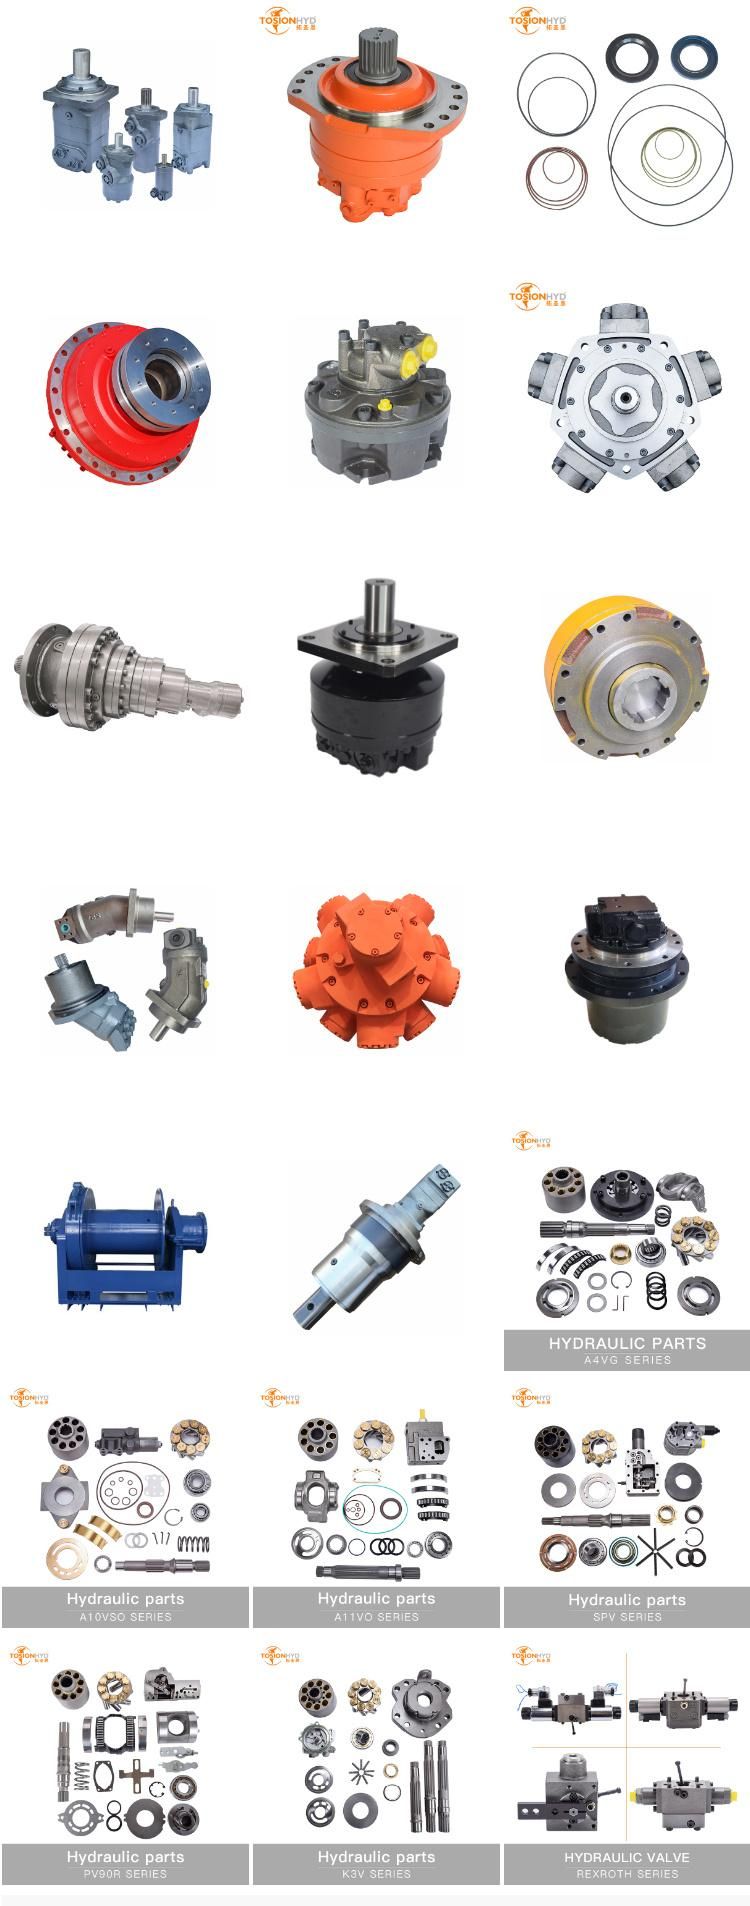 A6ve160 A6ve200 Hydraulic Motor Parts with Rexroth Spare Repair Kits